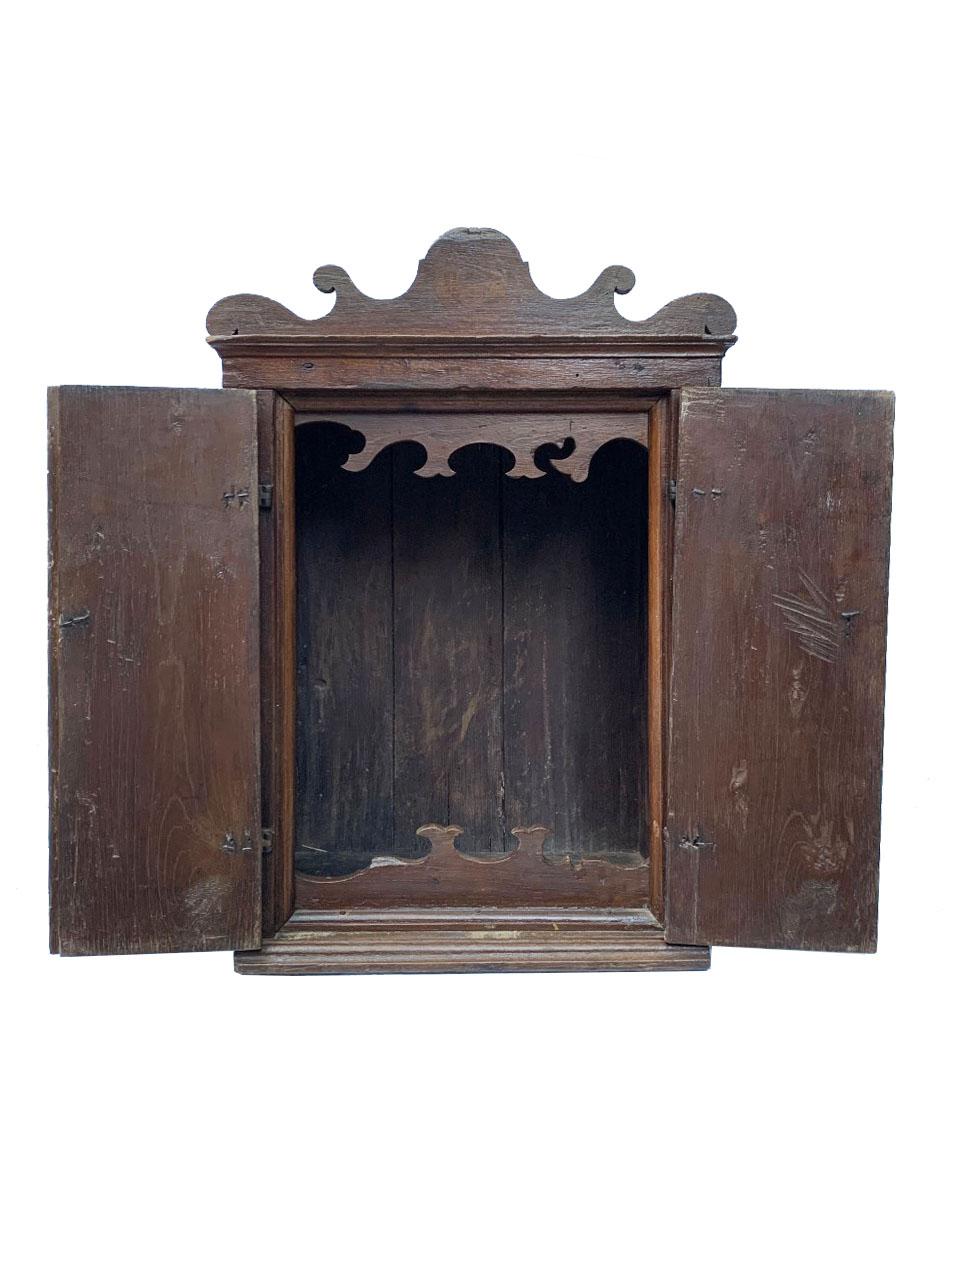 Rare 17th Century South American Colonial Shrine 
Straight box with pediment cut into stylized volutes. Made of polished cedar, with wrought iron fittings, this oratory reflects the austerity of Brazil in the 17th century.
Dimensions in centimeters: